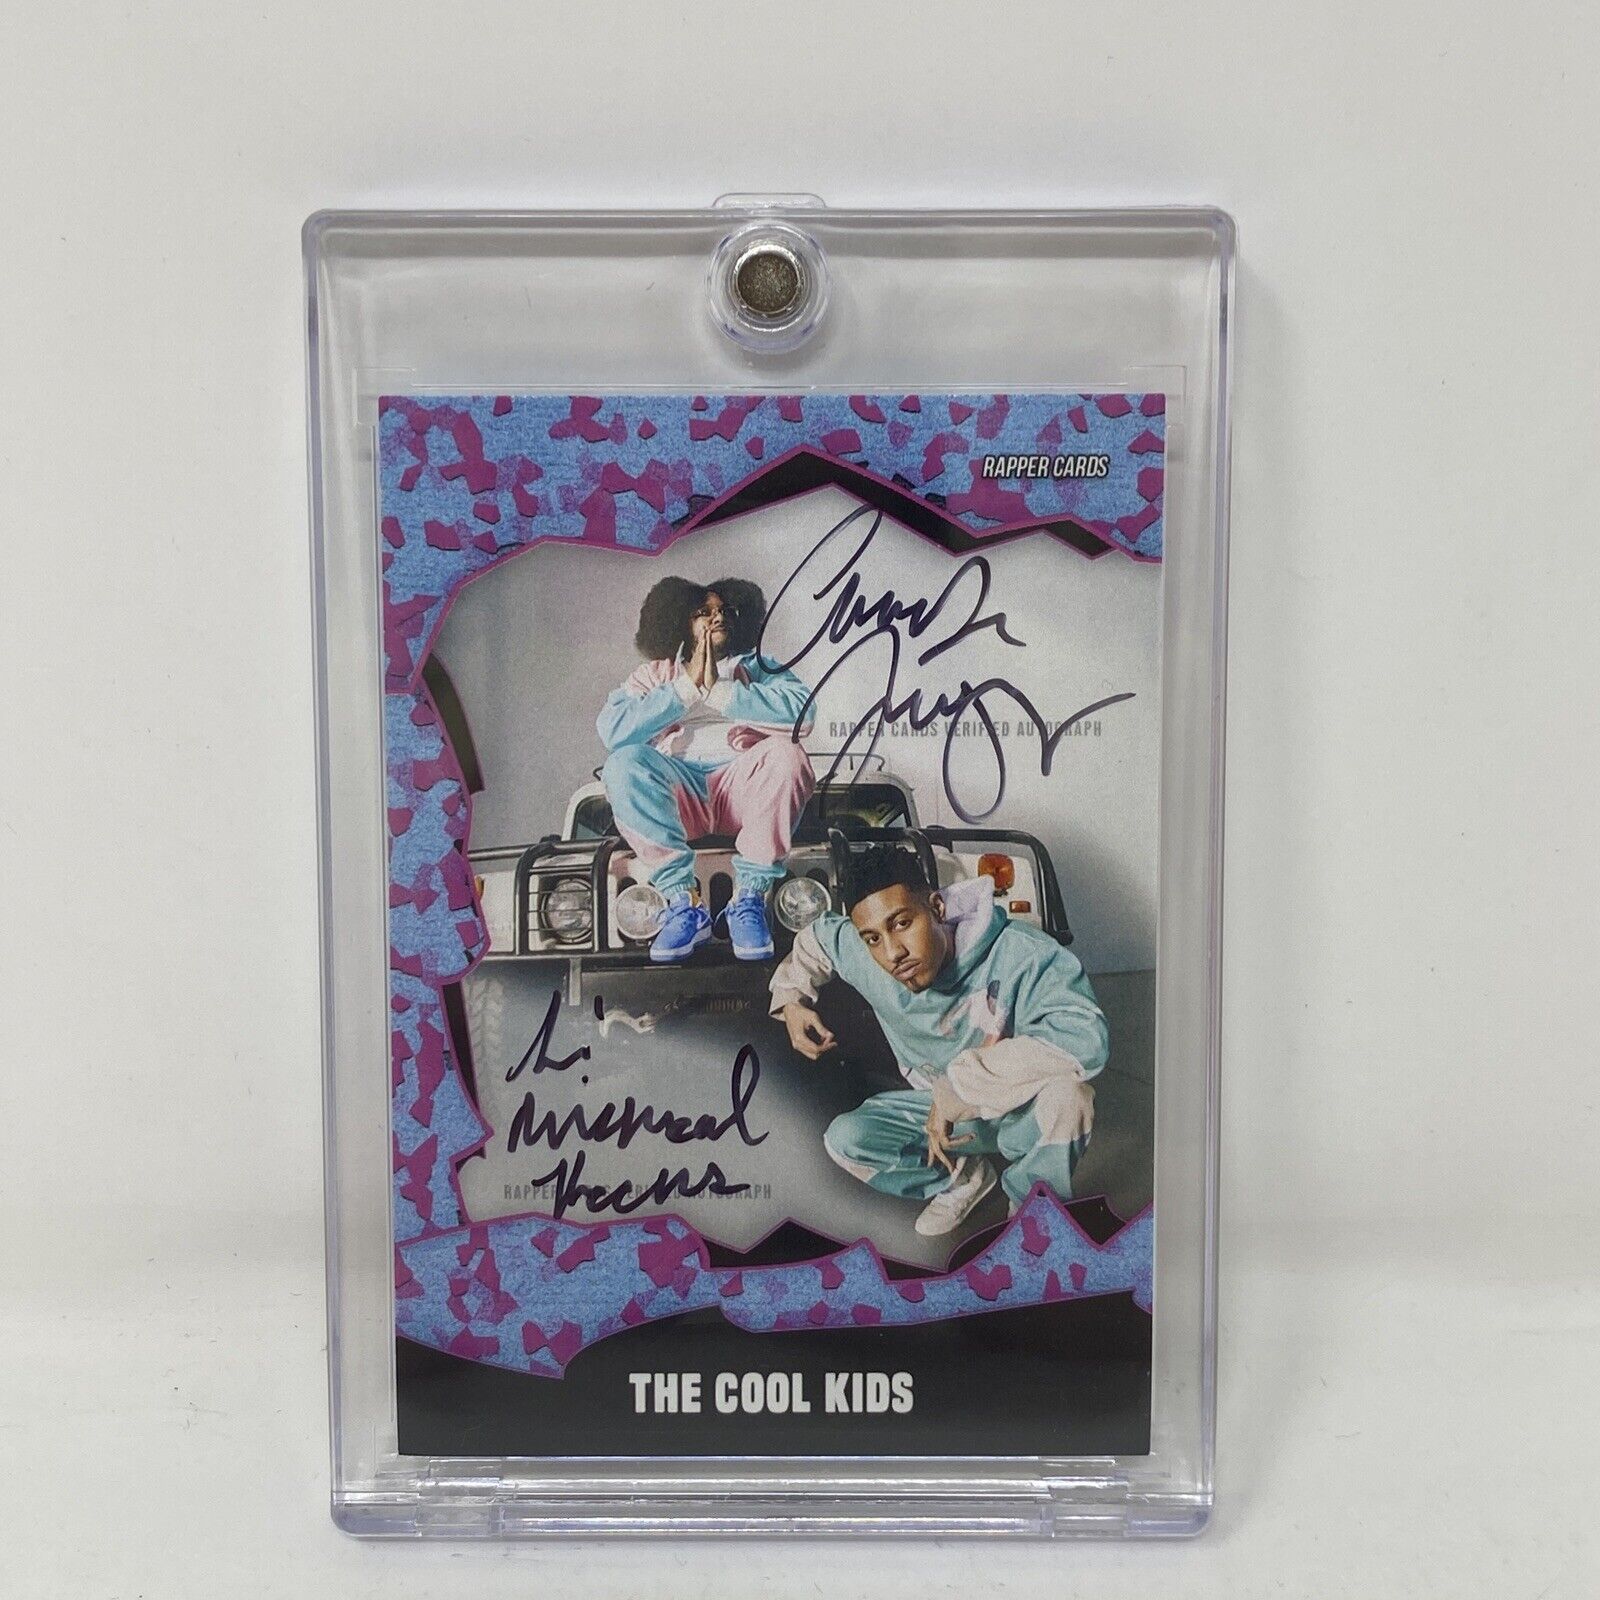 Rapper Cards THE COOL KIDS Autographed 81/100